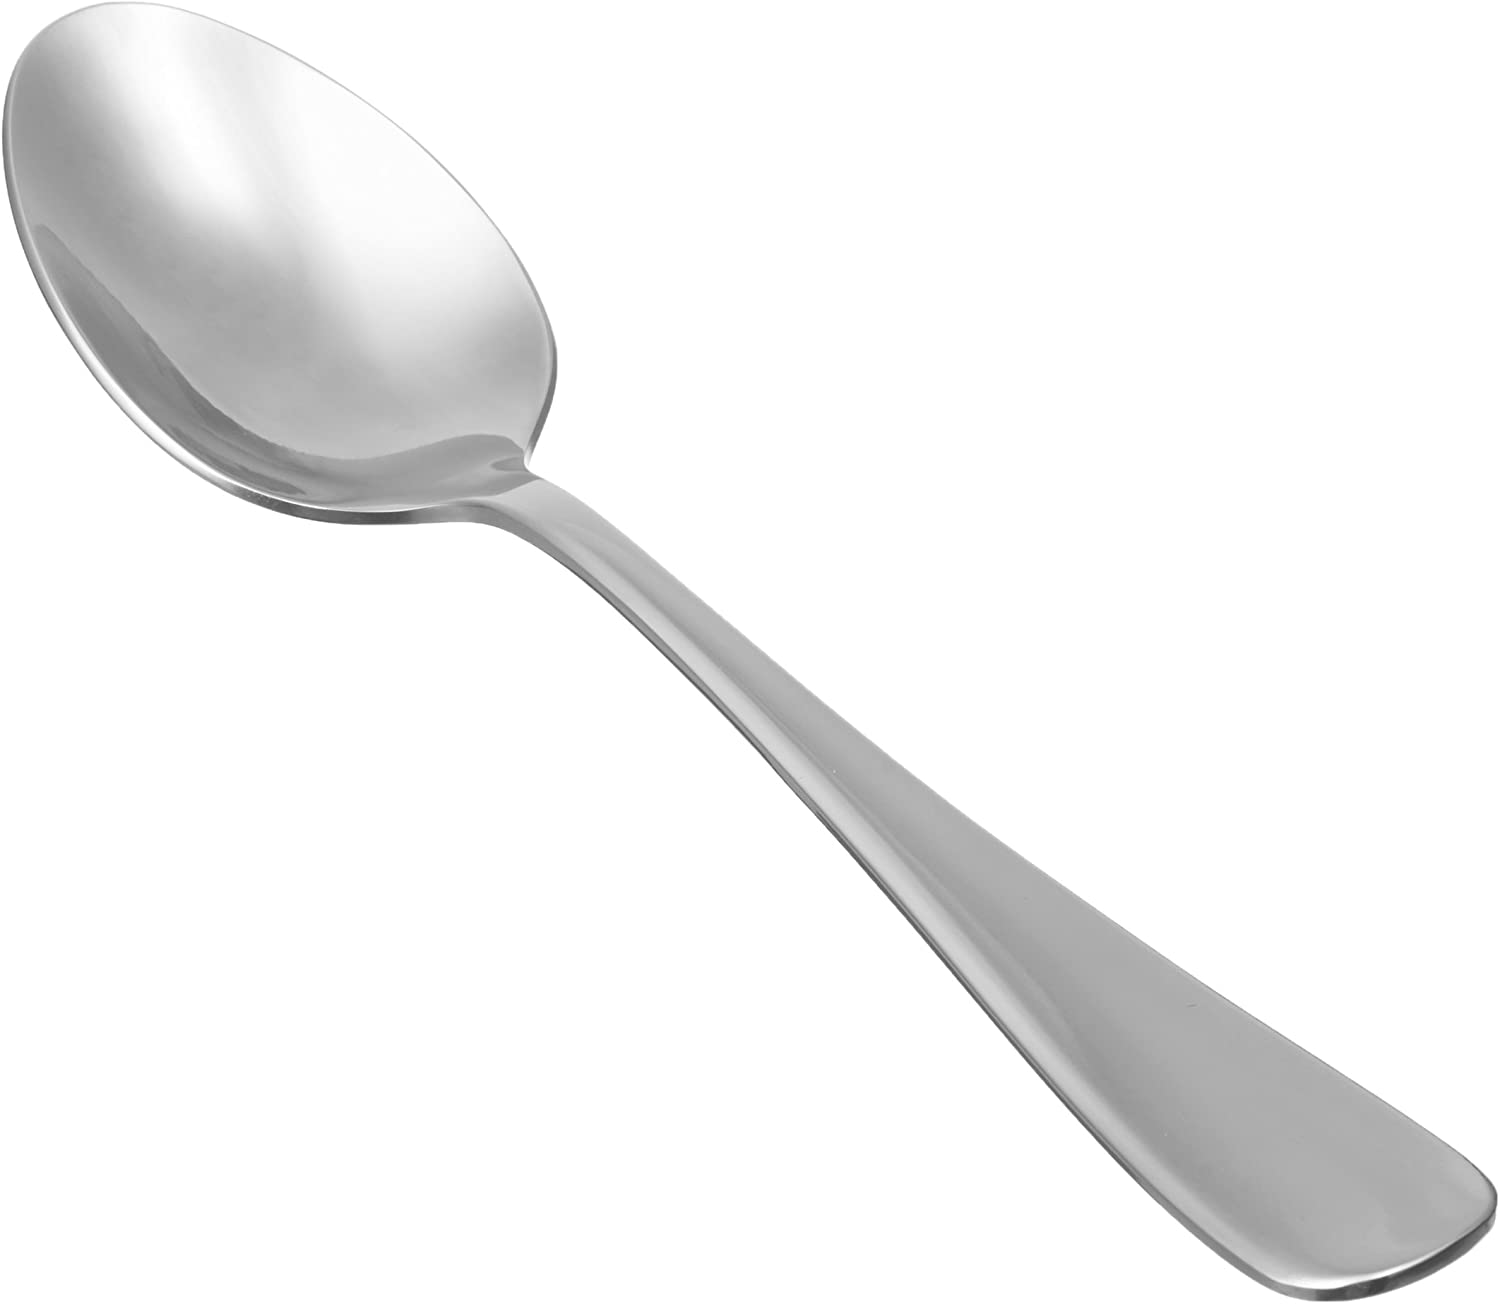 Amazon Basics Stainless Steel Dinner Spoons with Round [...]